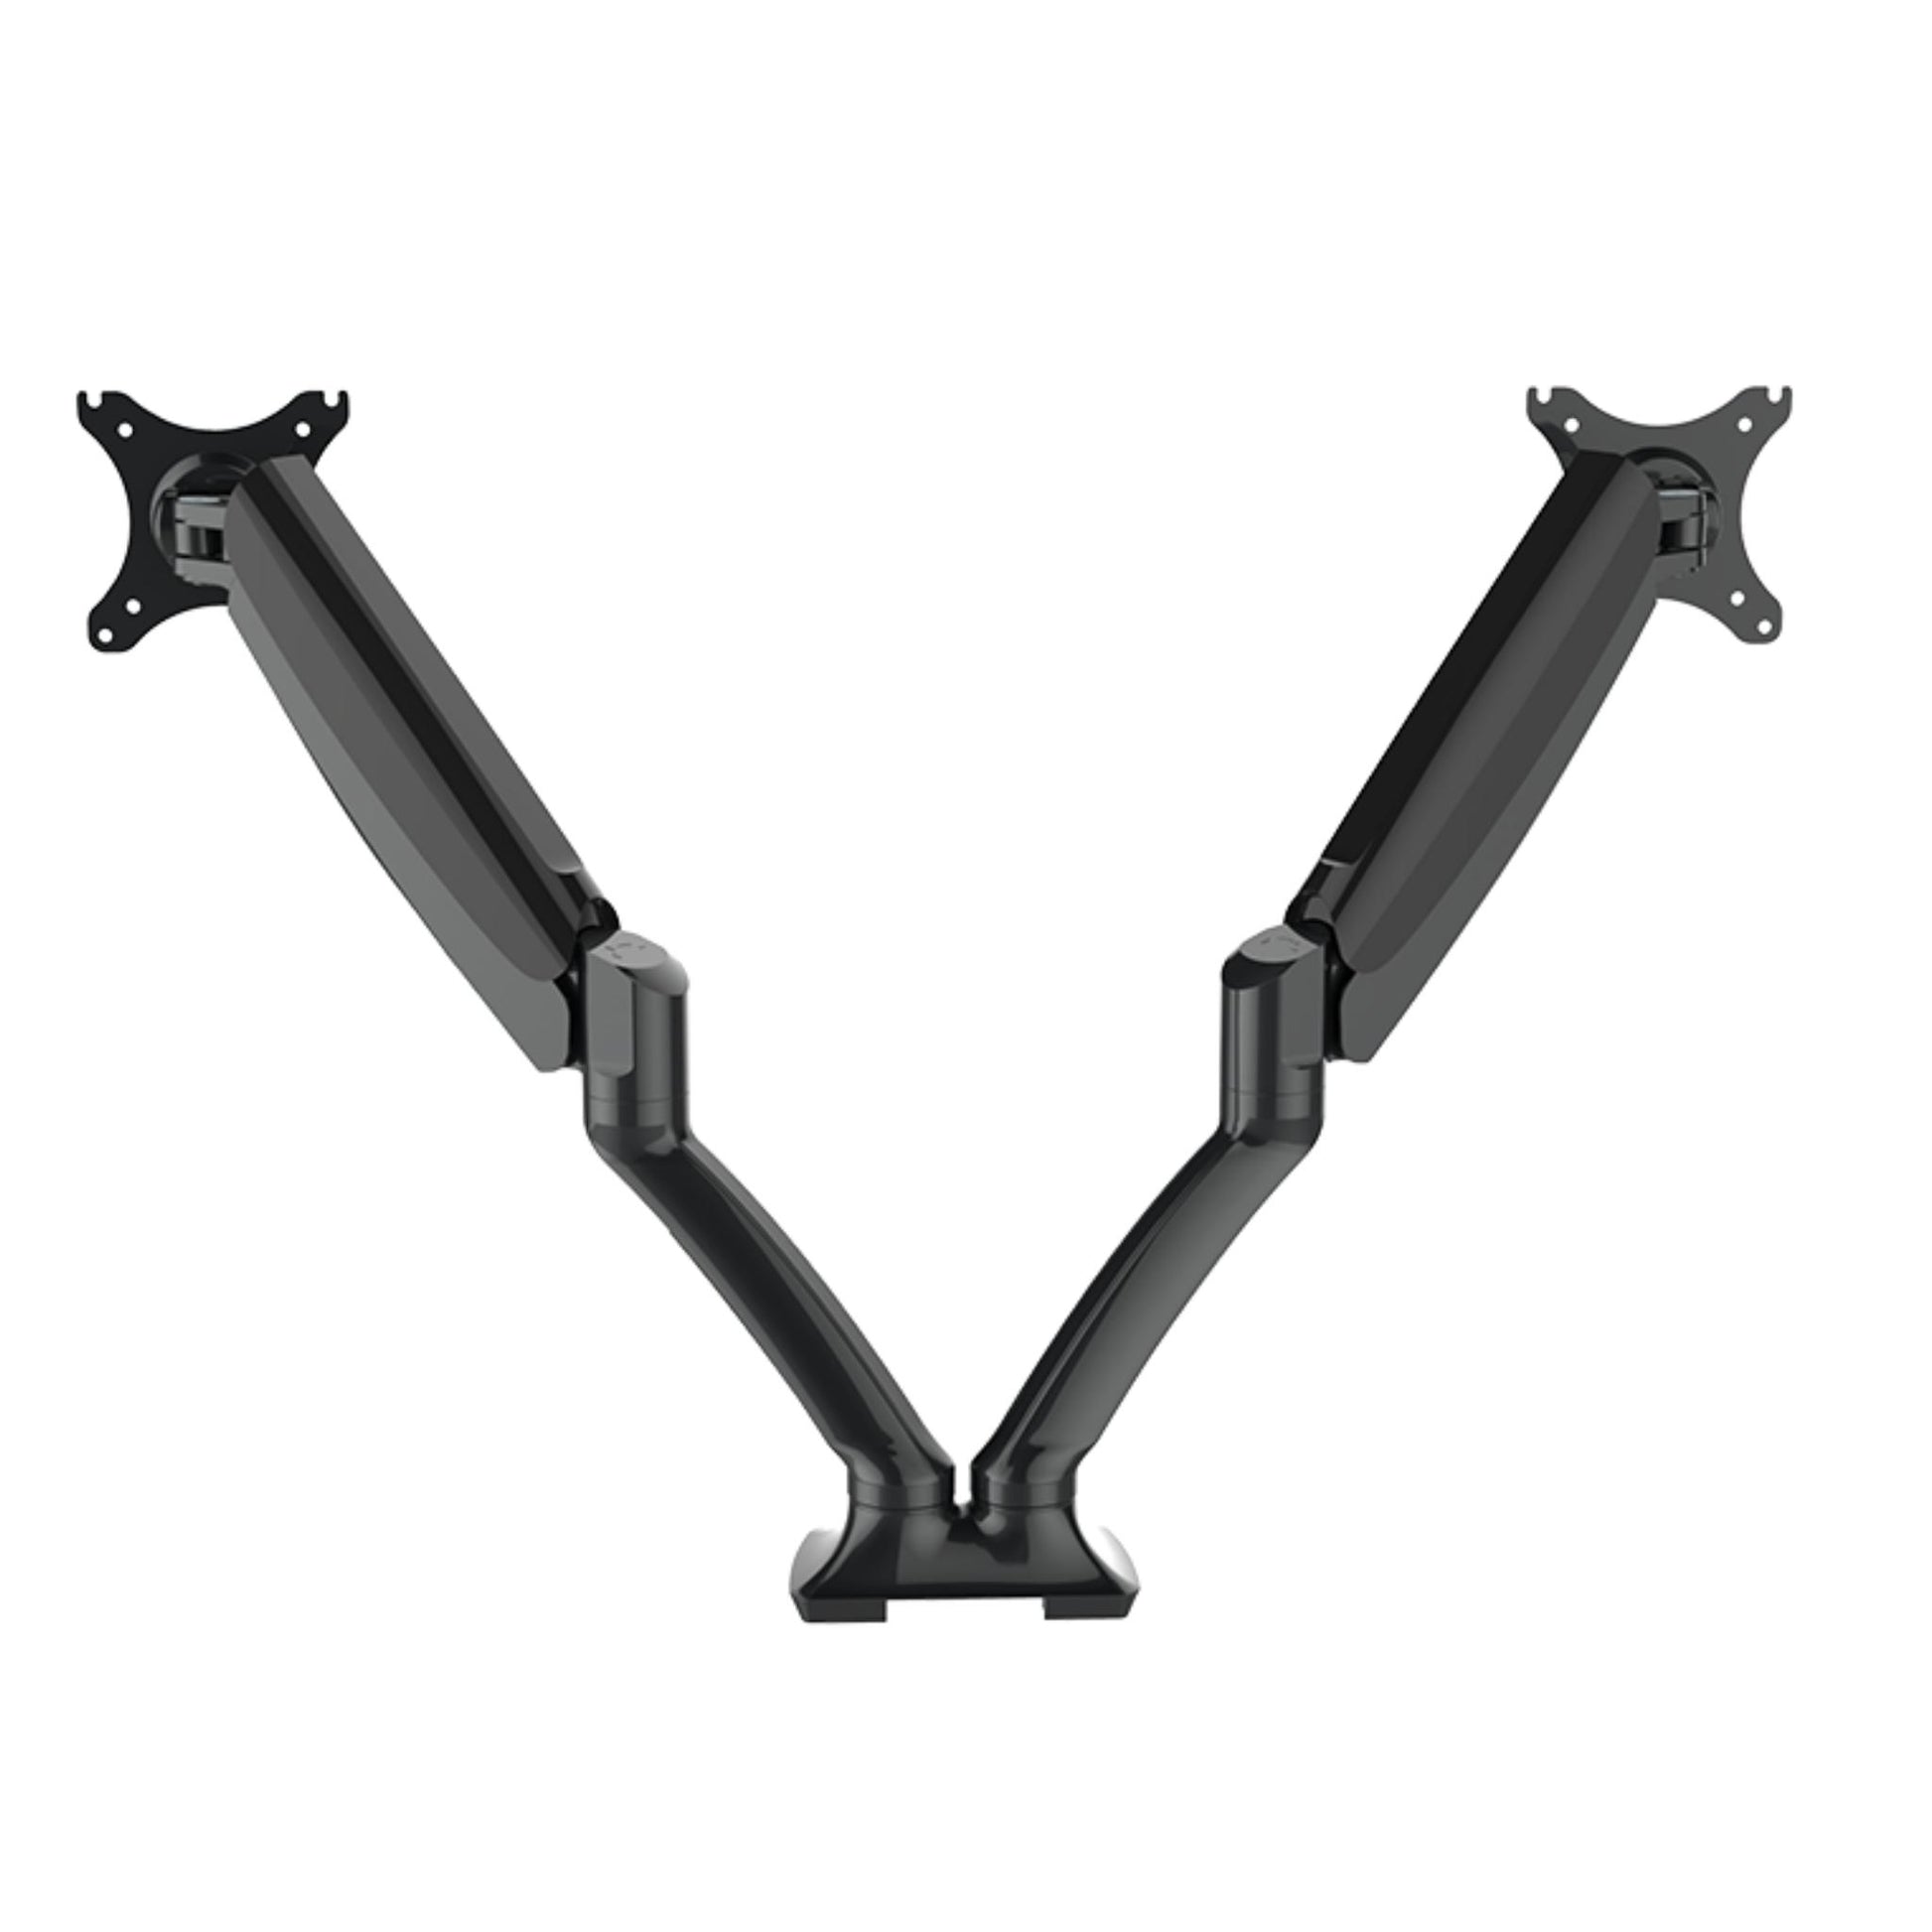 Dual Gas Spring Monitor Stand - Black 6